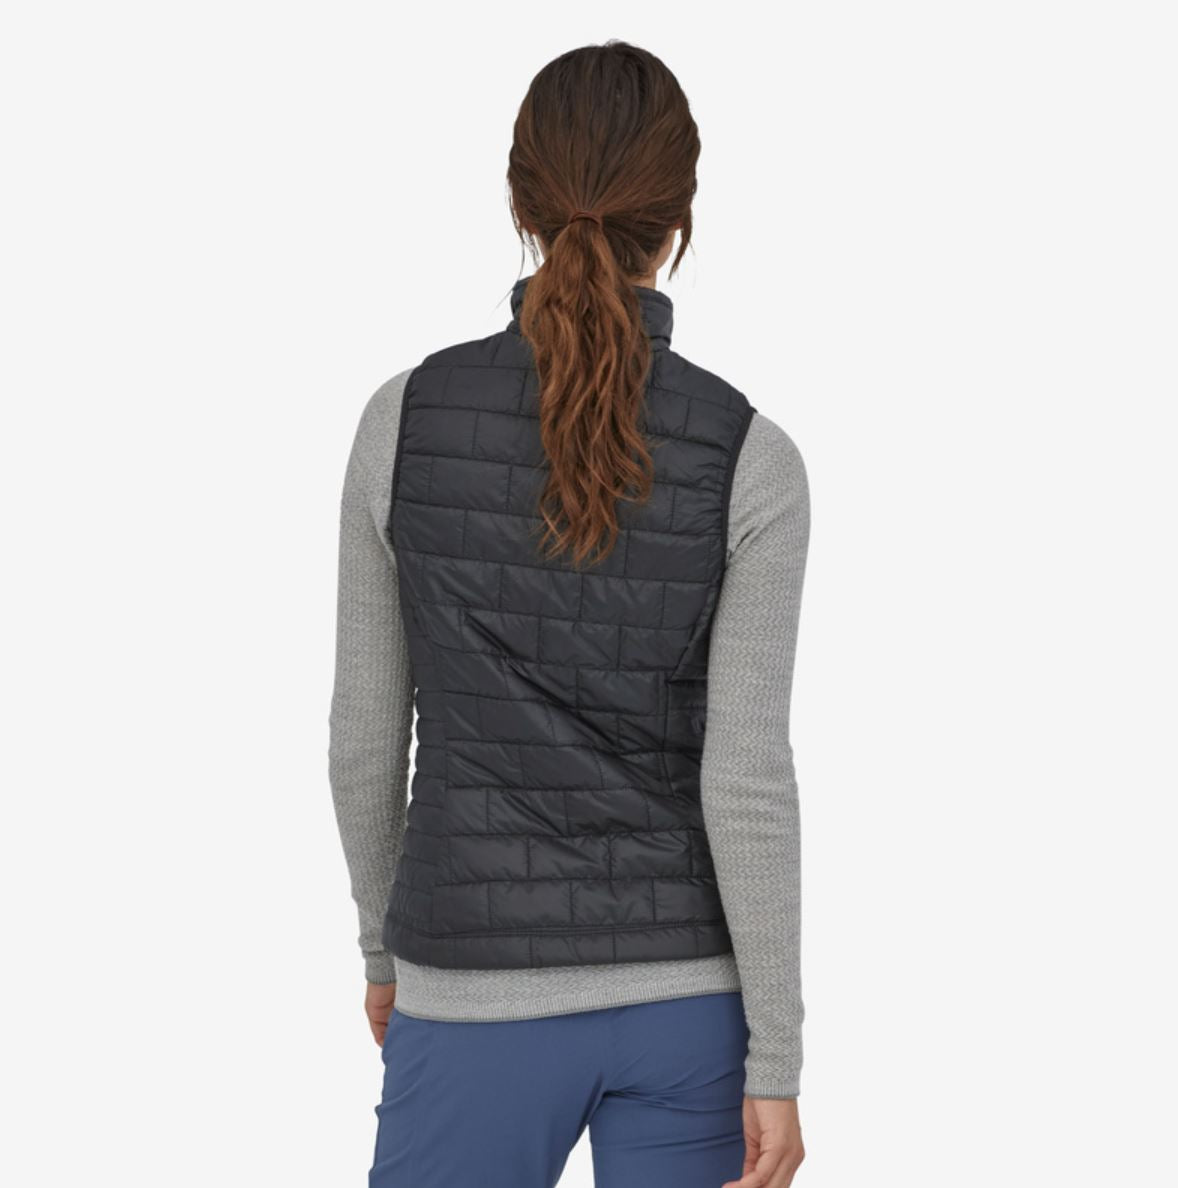 patagonia womens nano puff vest in black, back view on a model